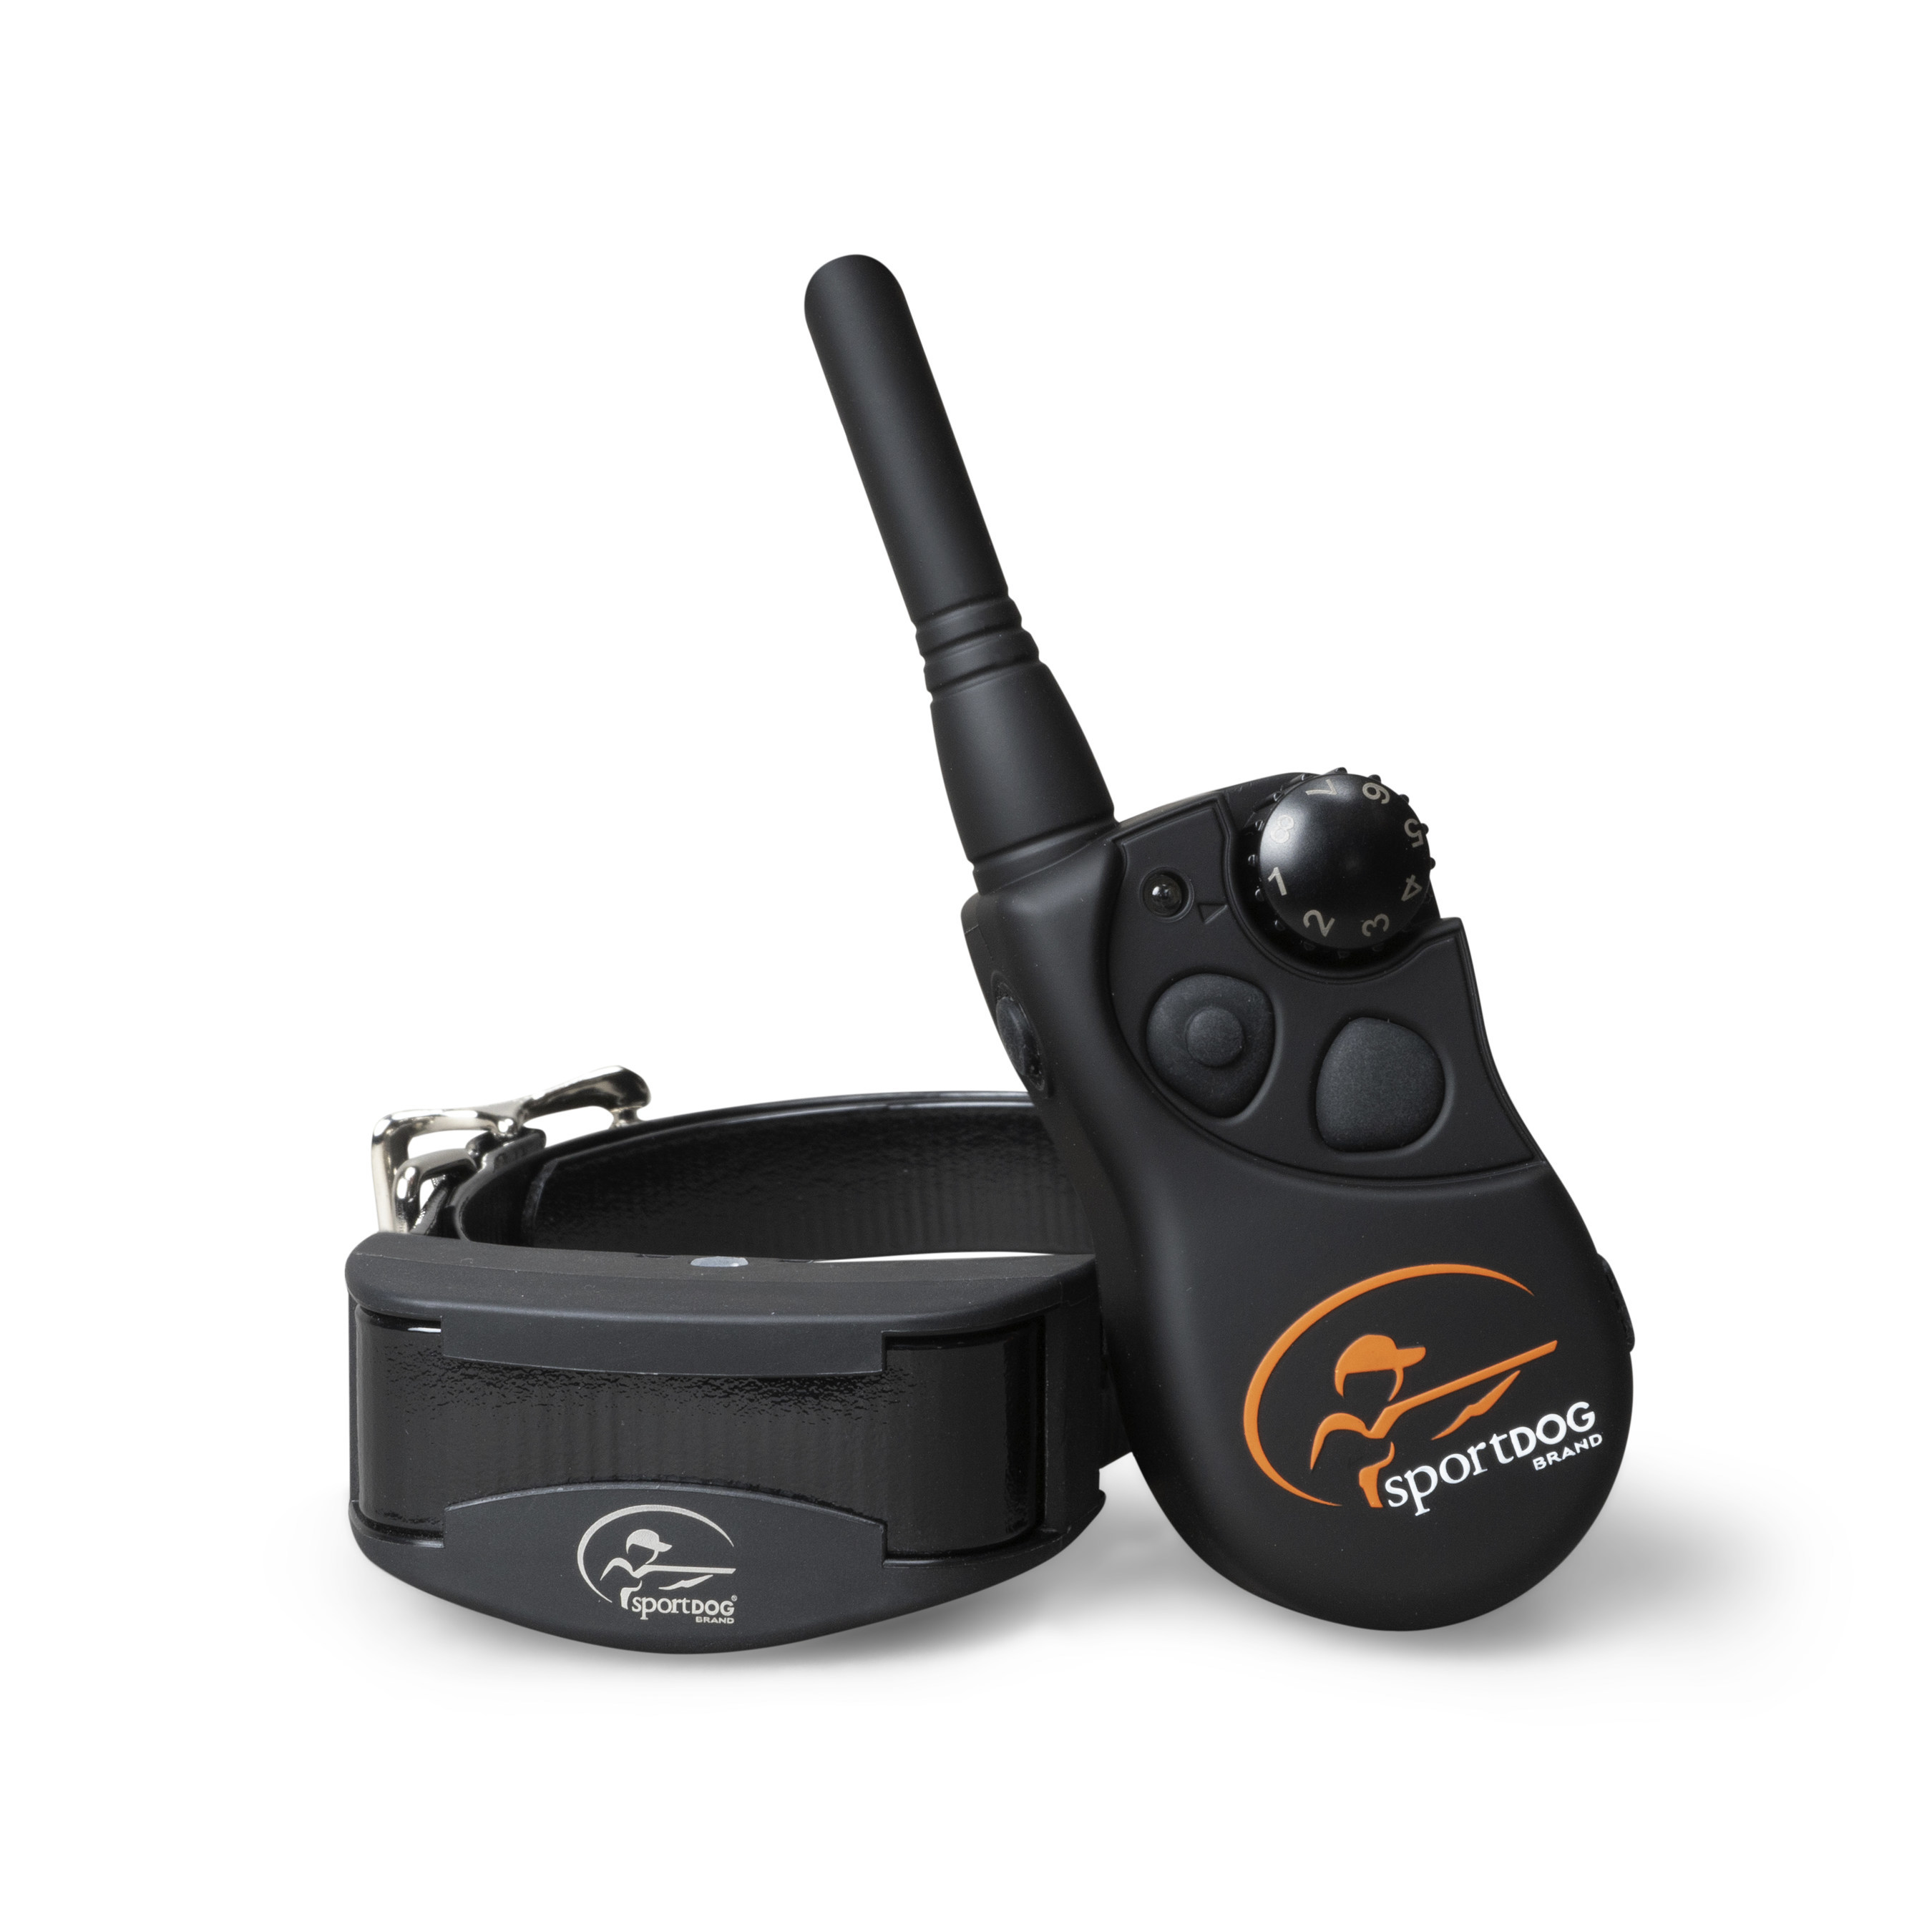 SportDOG Brand® YardTrainer 100 is the Affordable Tool for Basic Obedience Training